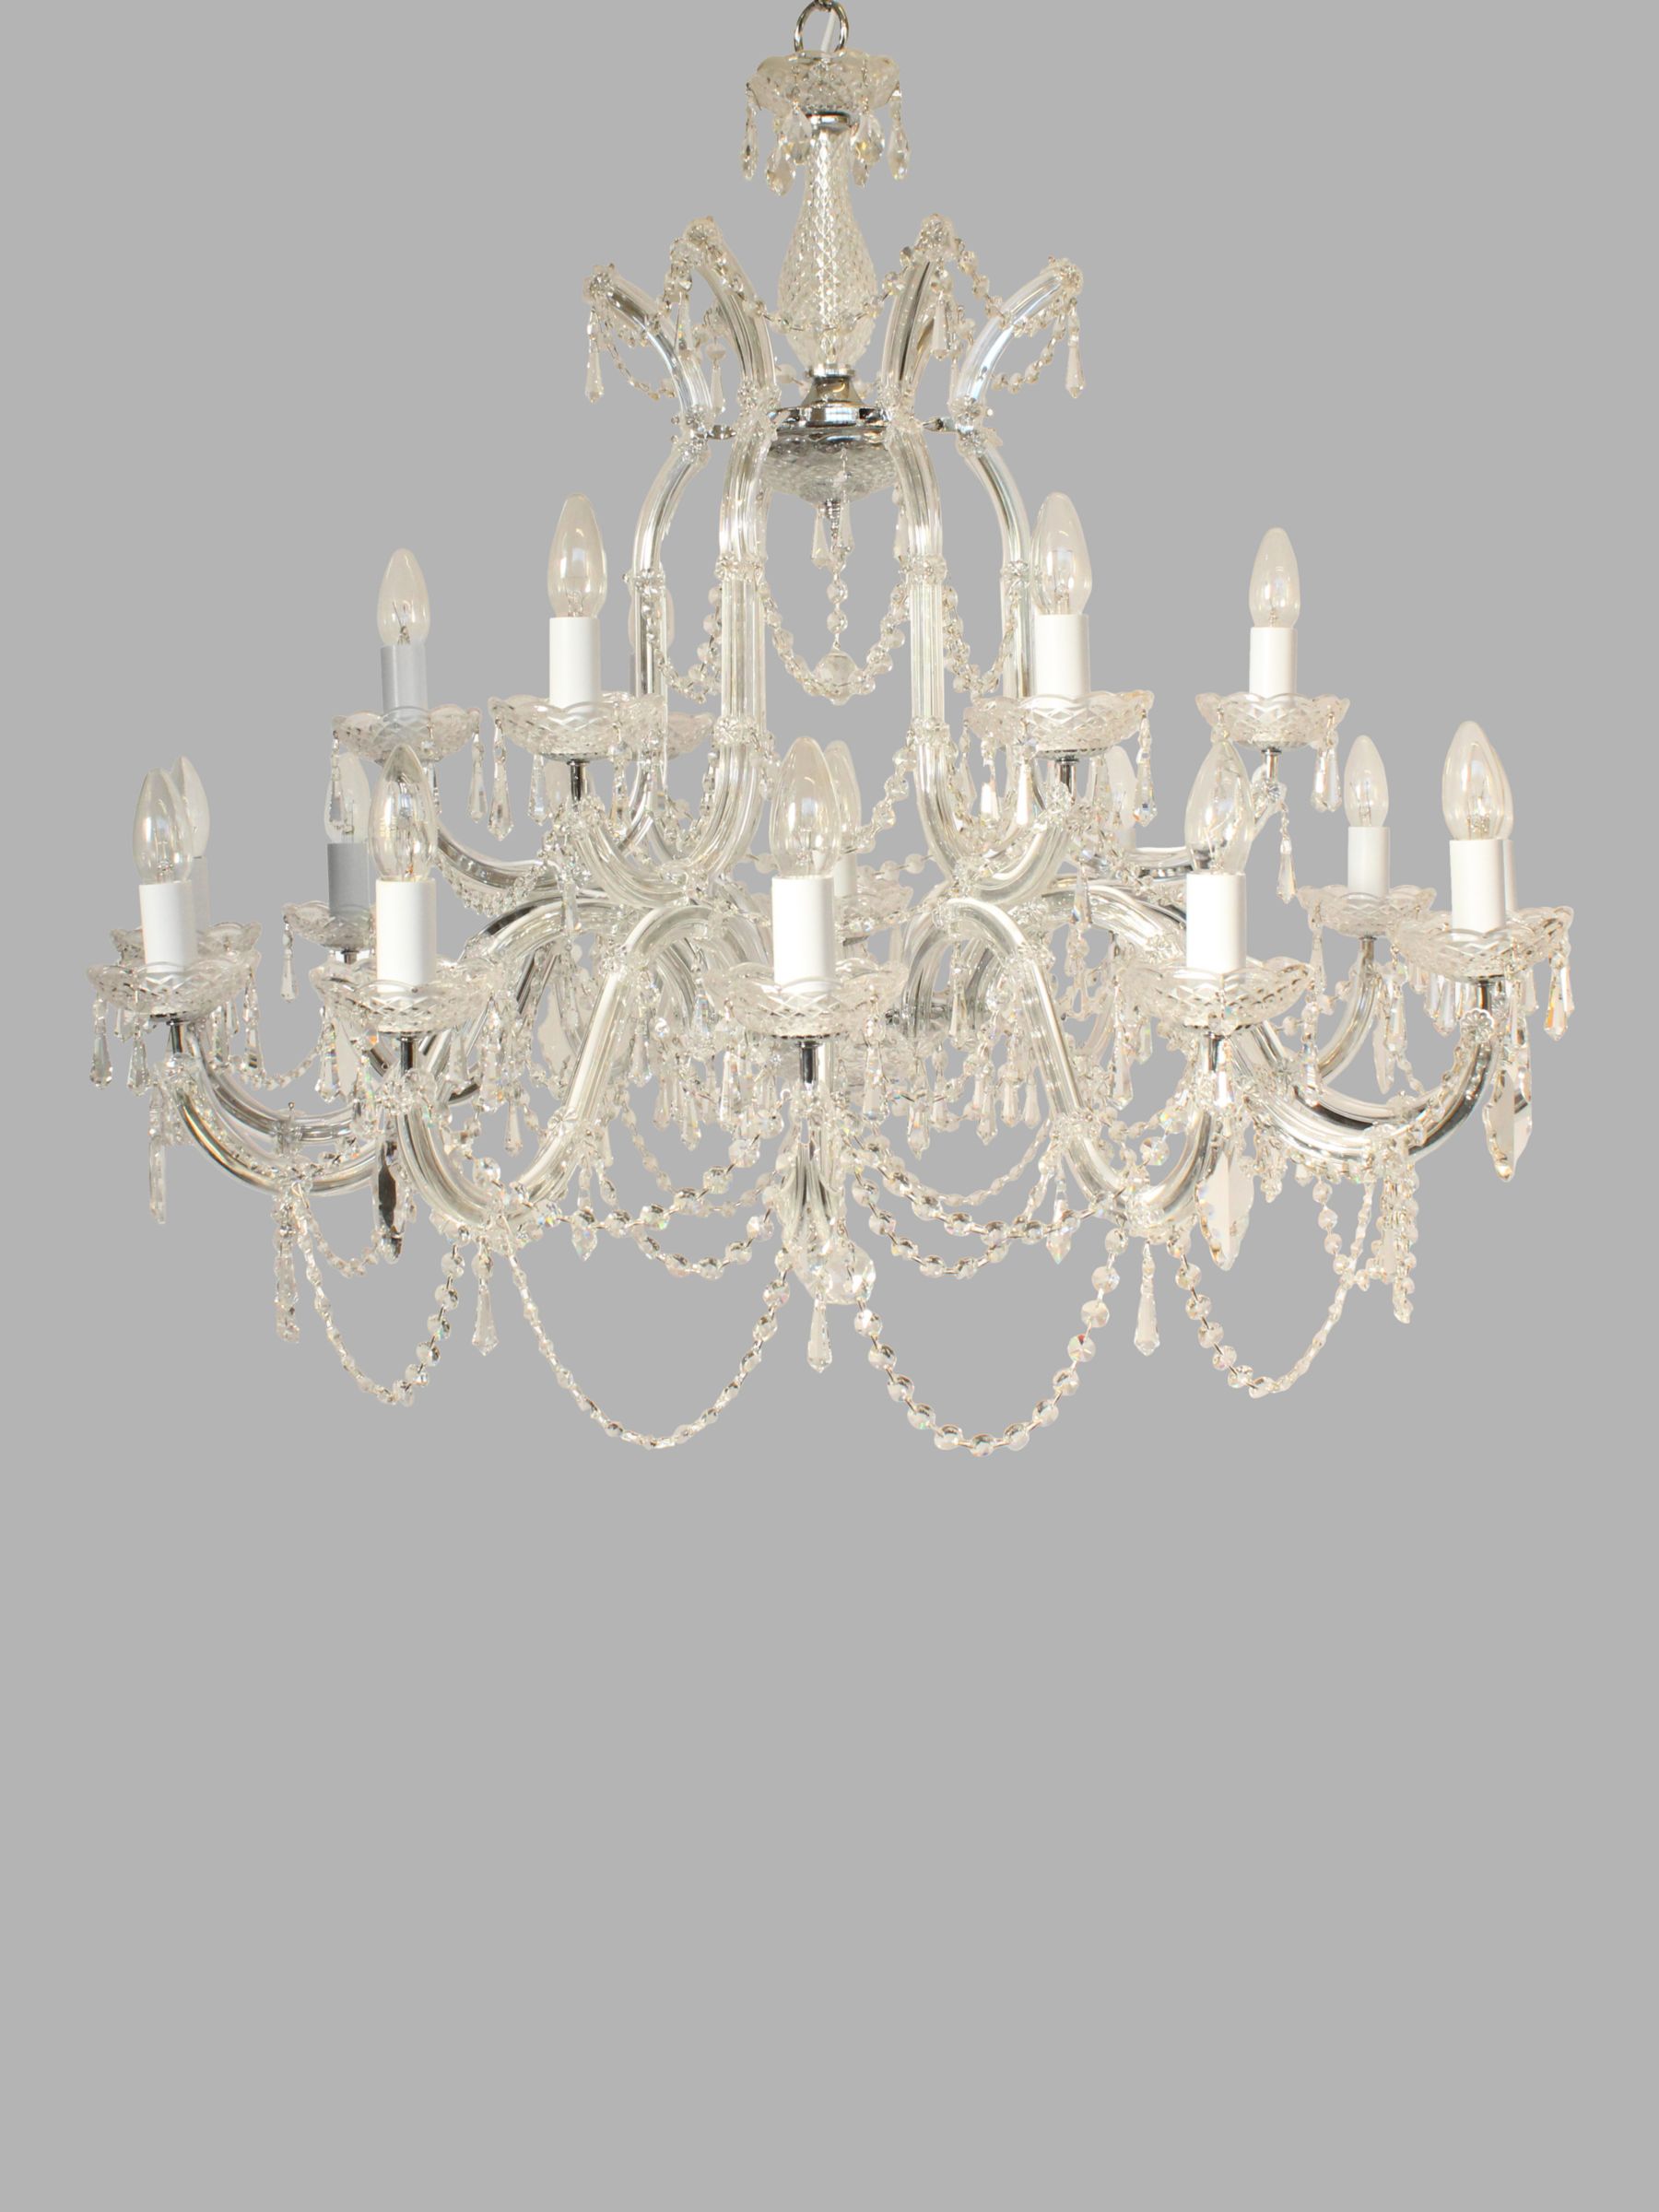 Photo of Impex marie theresa crystal chandelier ceiling light extra large